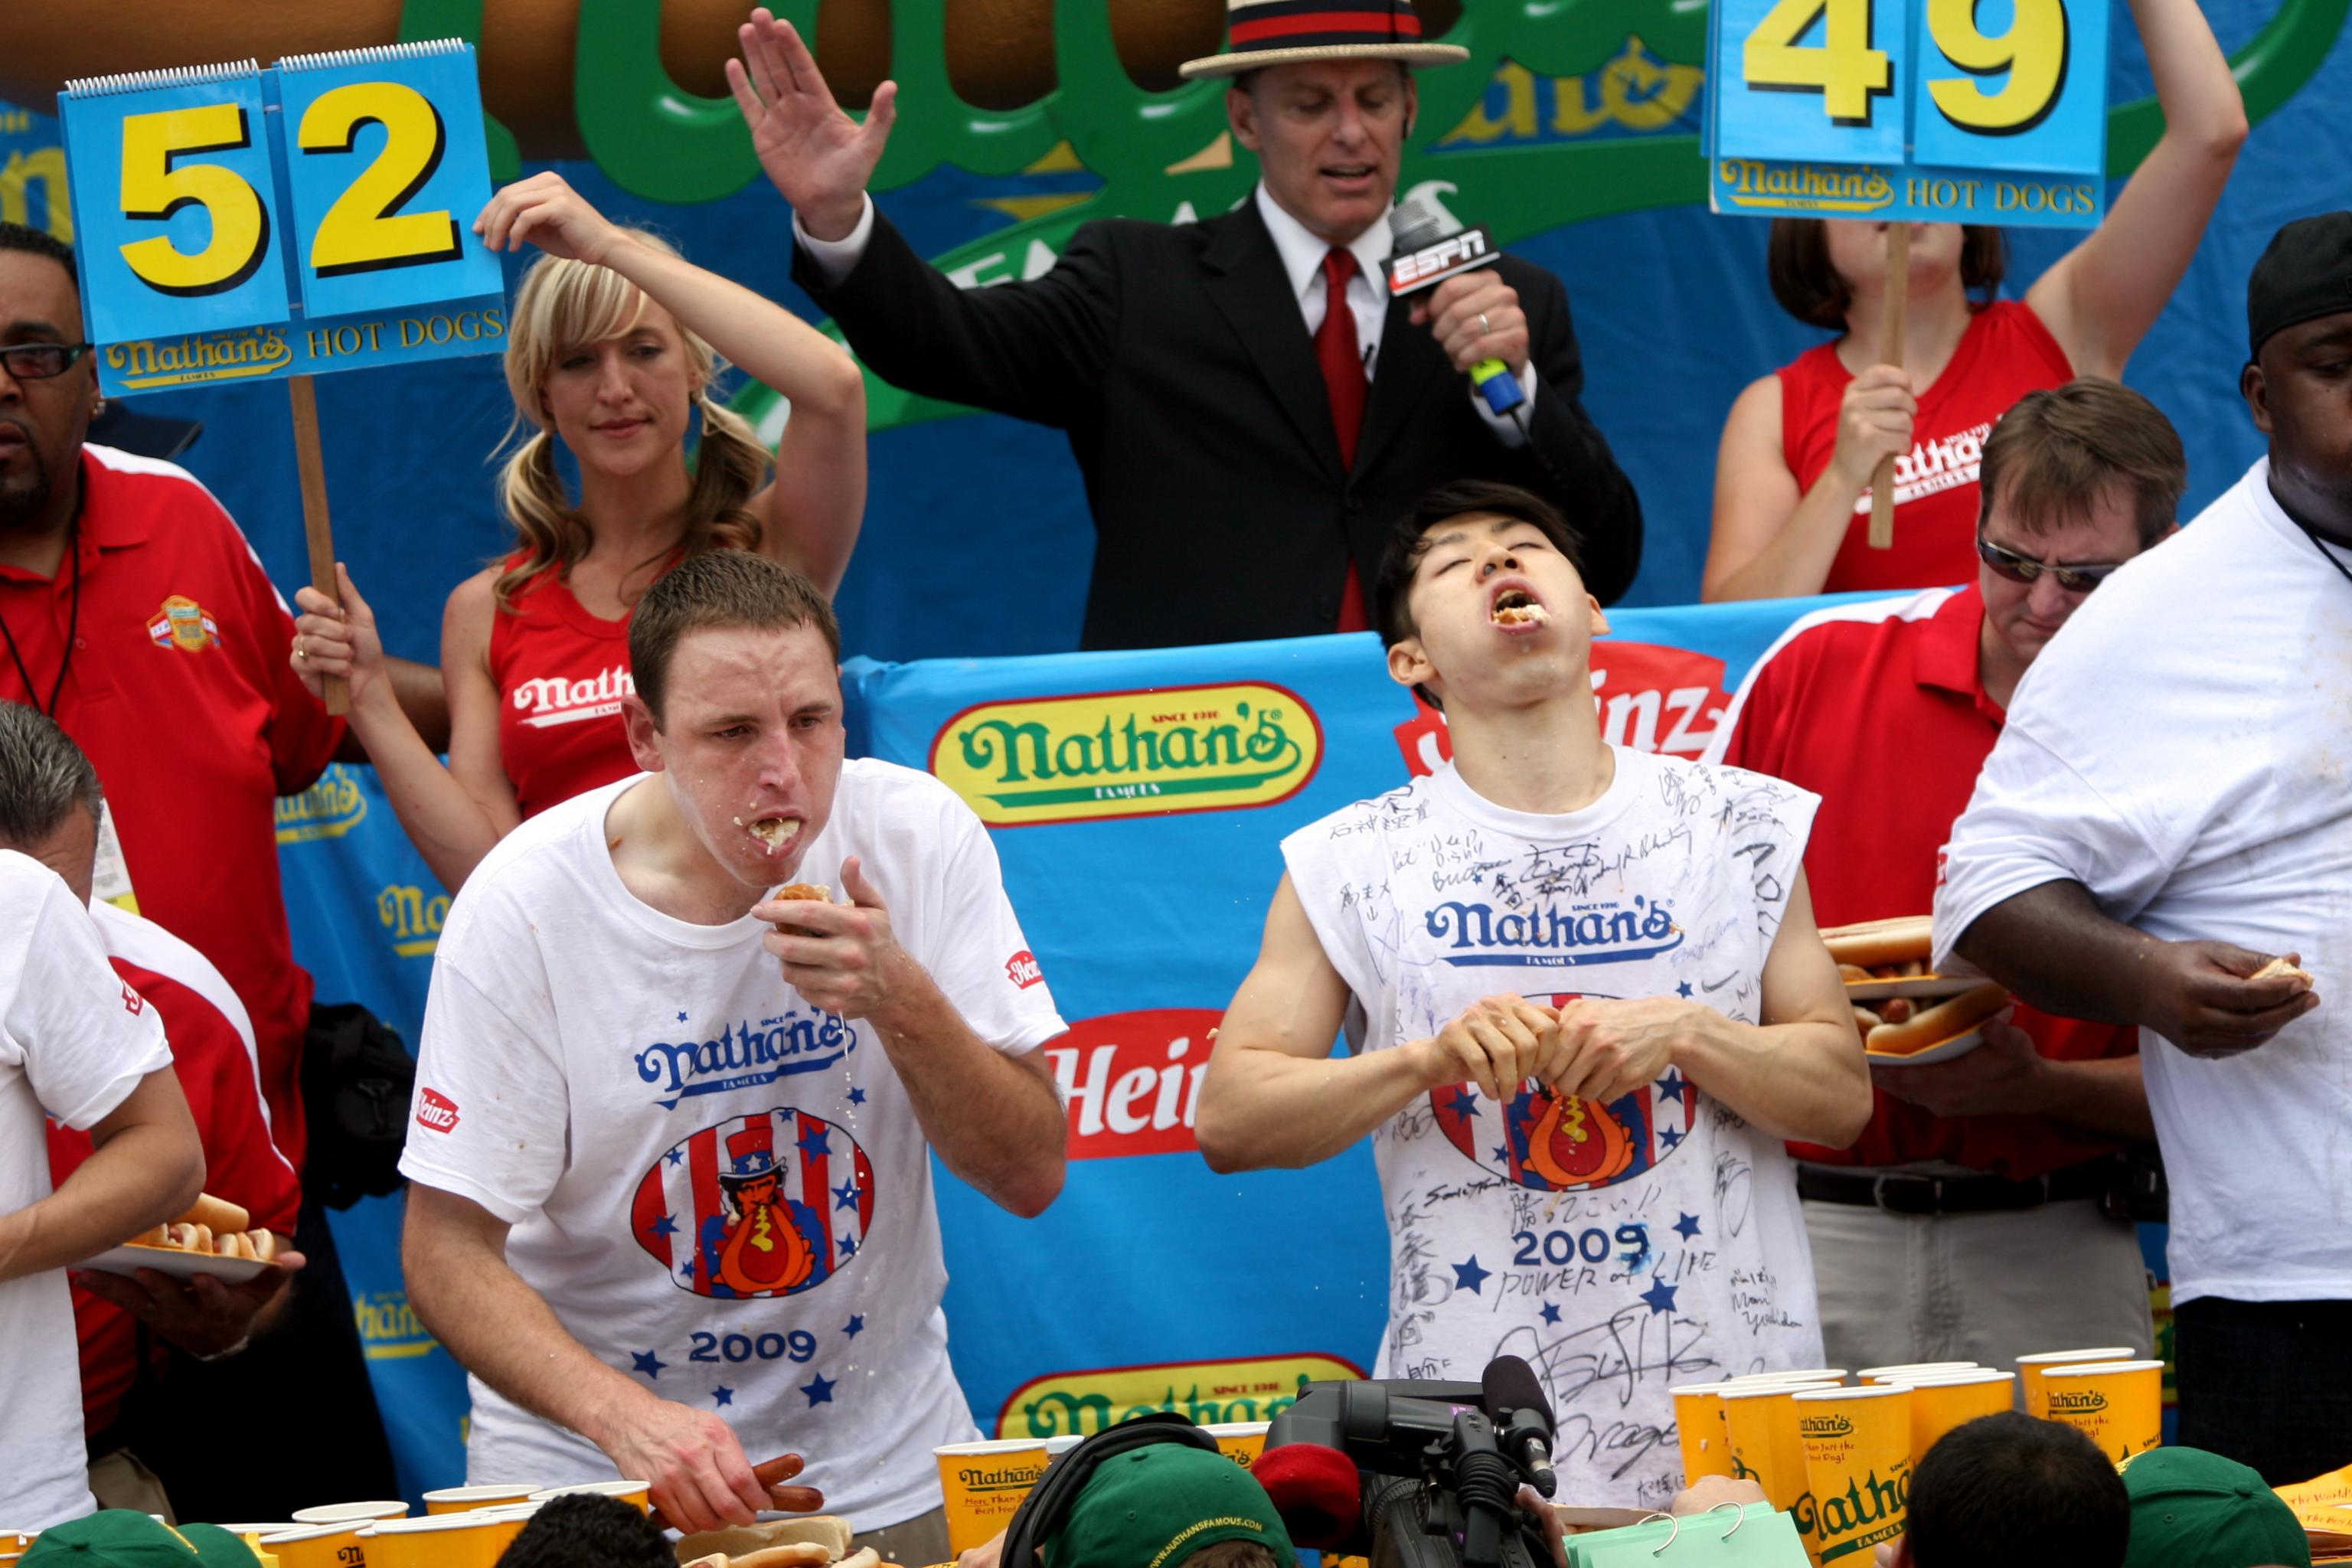 Do contestants throw up after hot dog eating contest information